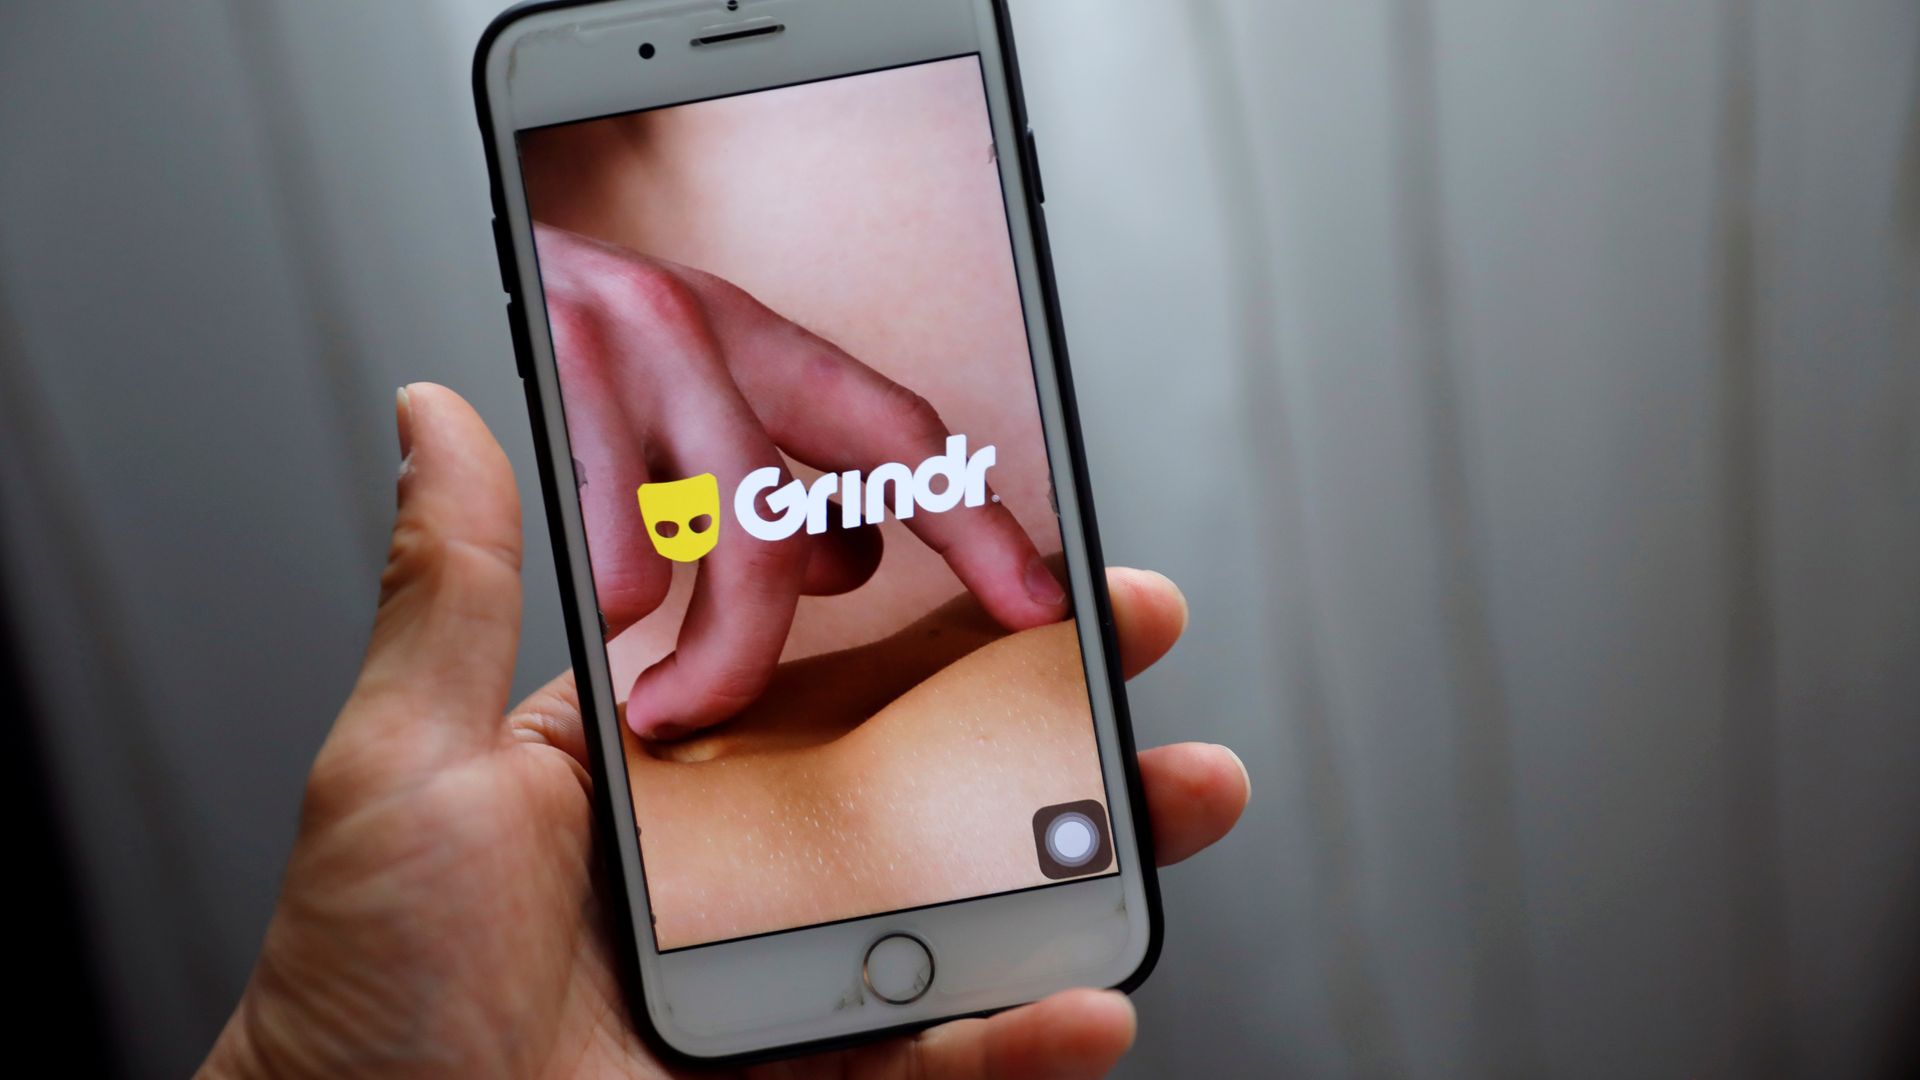 Gay dating app Grindr sued for allegedly sharing users' HIV status